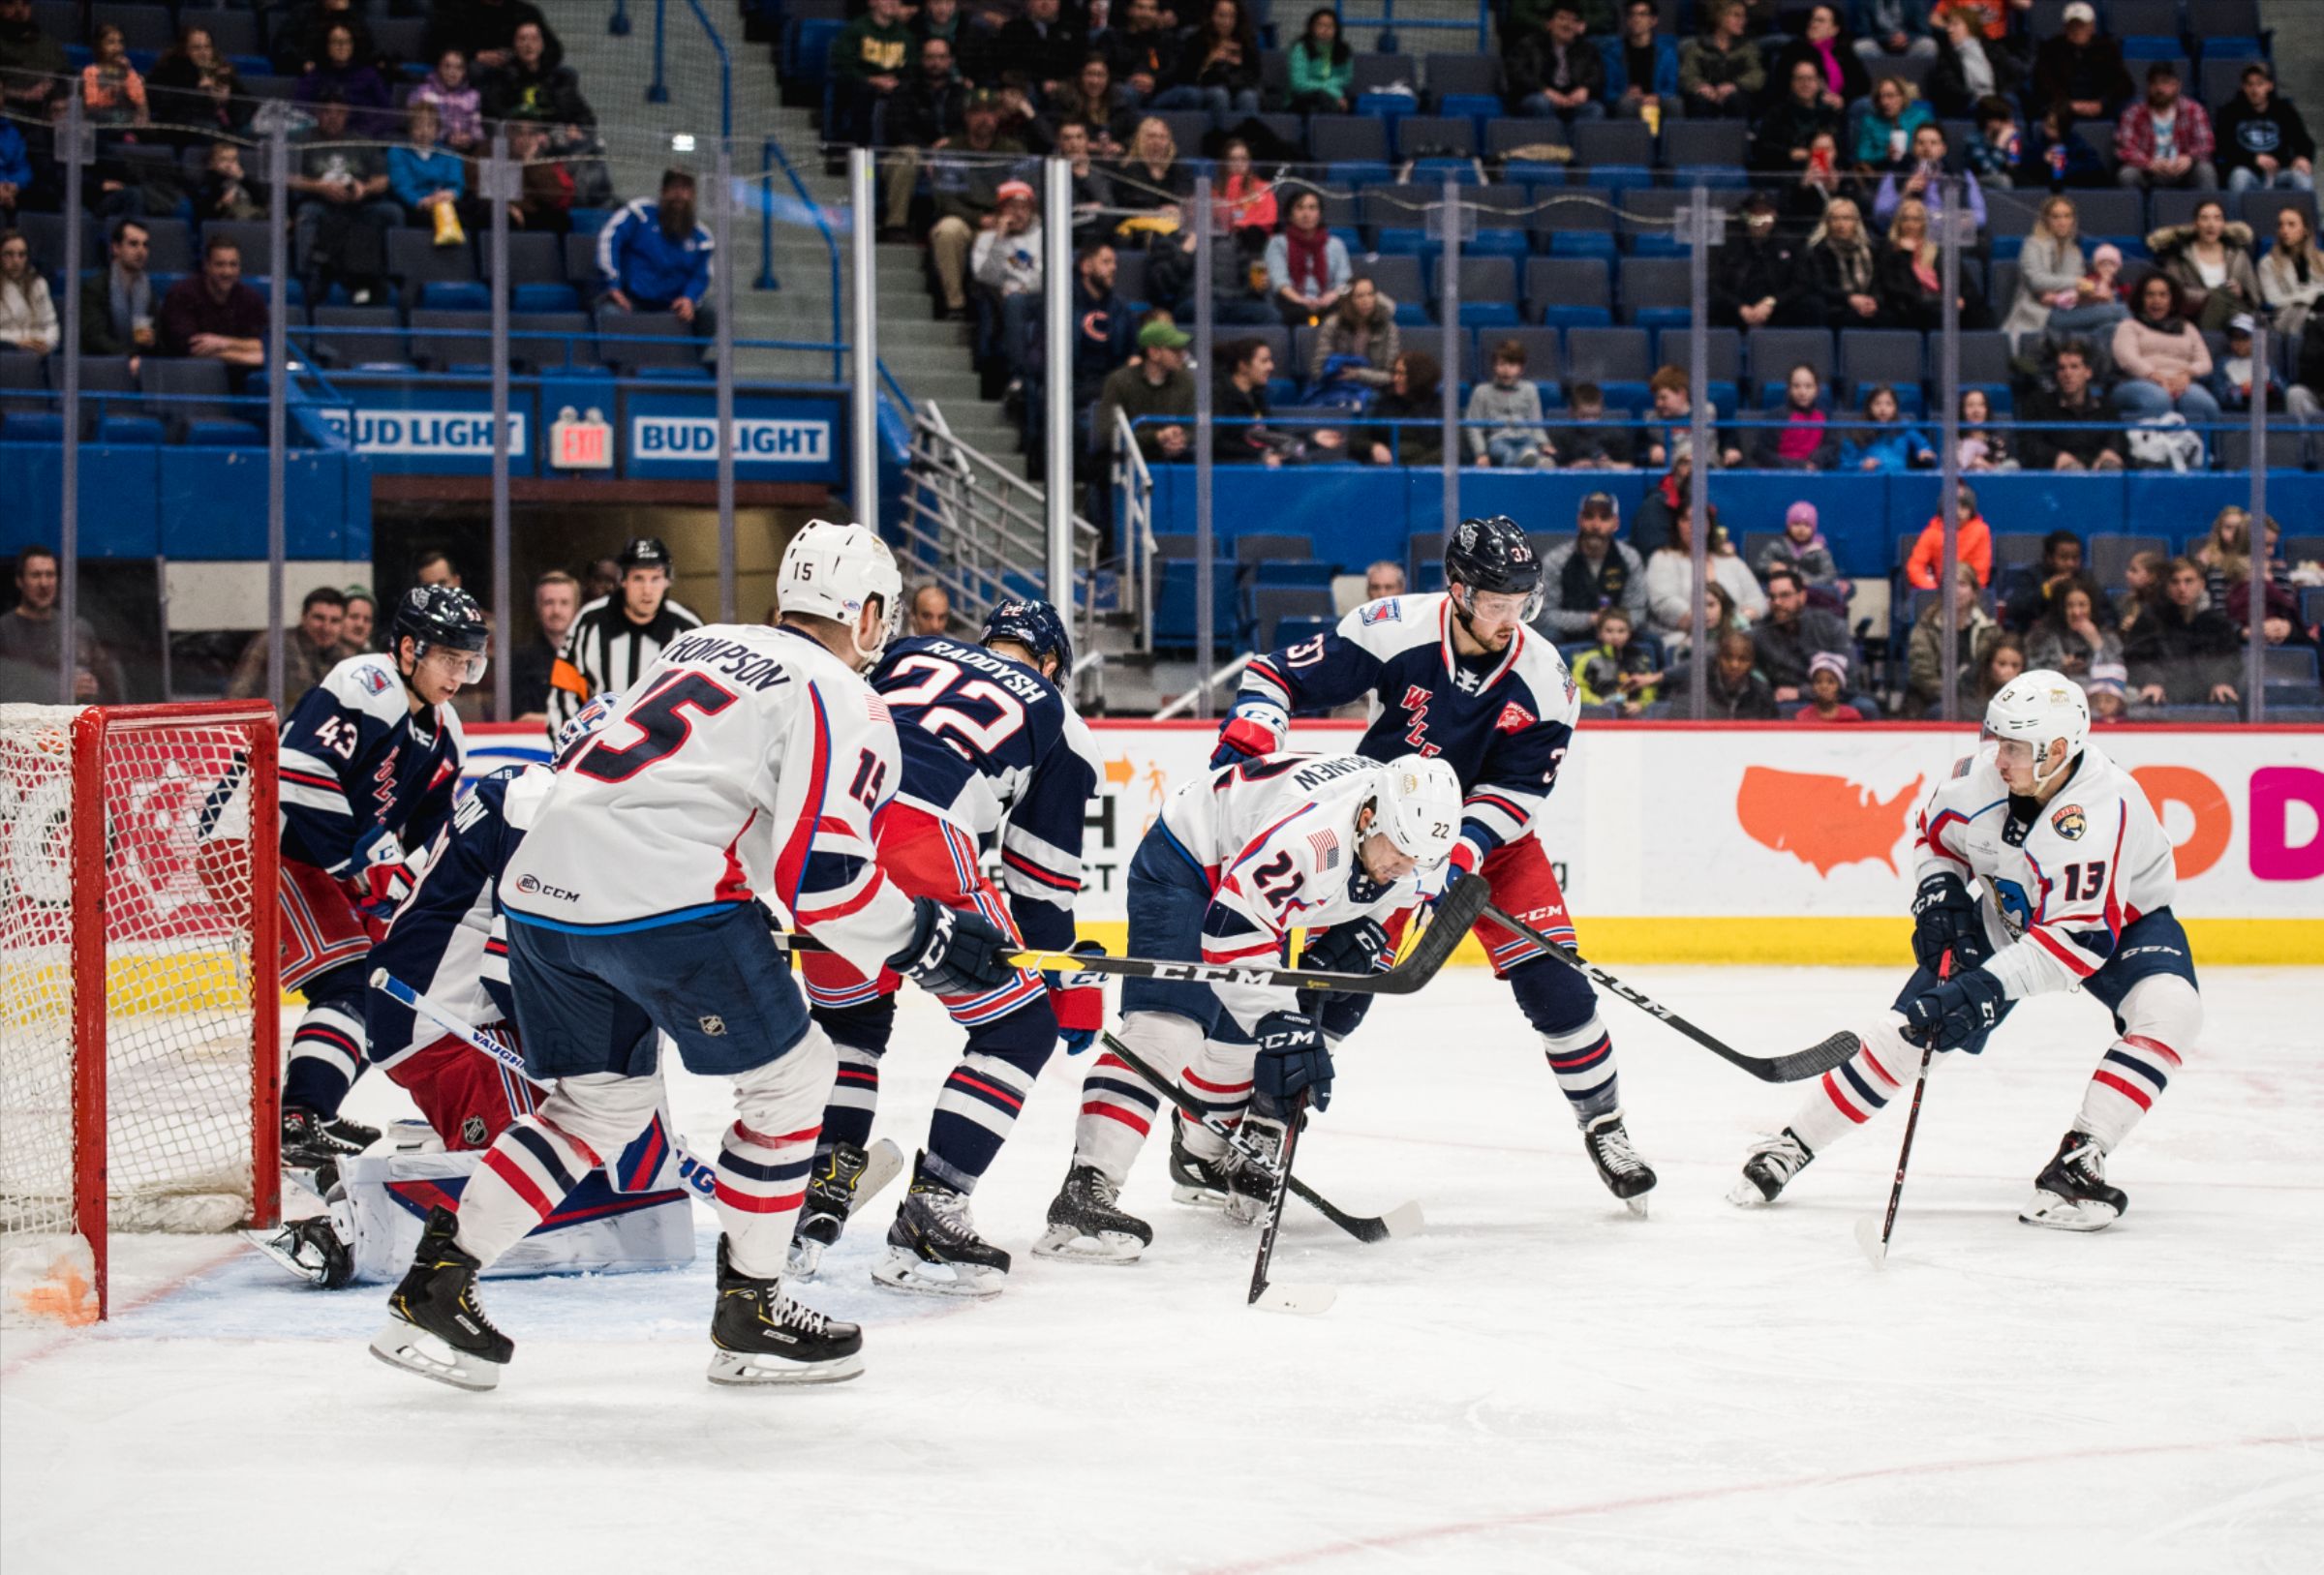 Springfield Thunderbirds - Only 3 hours left to bid on some game